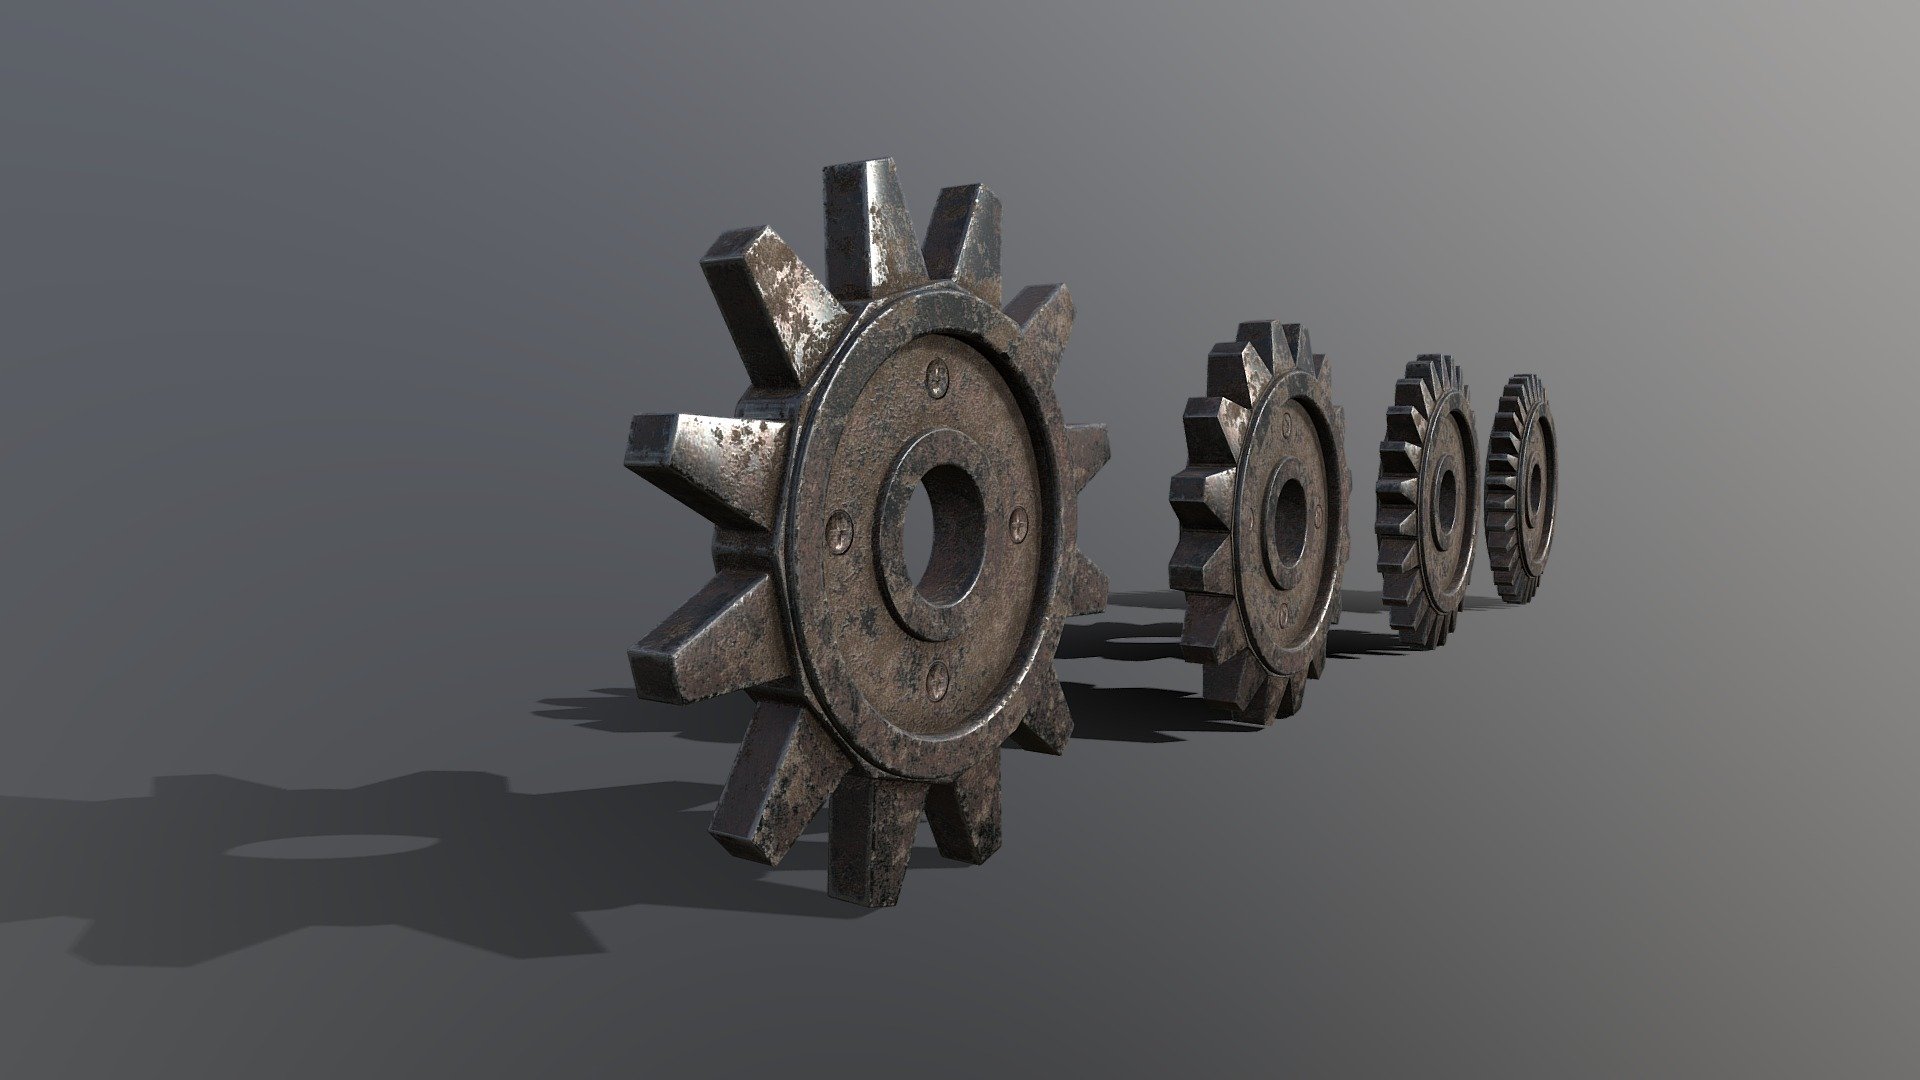 Industrial Gear Set 07

All objects Modelled to give a worn, aged look to each Gear, which you can easily build up a complex Gear system to fit within your project/scene

Great assets if you are creating a Steampunk scene!

Modelled in Blender 2.80 

3 Formats included:

Blend

Fbx

Obj/Mtl

All Textures

Textured in Substance Painter 2

Approximate Diameter of each Gear: 500cm

Scale: 1.000 Metric

2K Resolution Maps / PBR /: Colour, Metallic, Roughness &amp; Normal 

(Height Maps provided in the Textures folder if you wish to use them)

2048 x 2048 Maps

Origin of all Models: Centre Of Mass

Please note if you are using EEVEE:

You may need to go into the Render Properties Tab - Performance - Enable High Quality Normals

Unwrapped - non overlapping UVs

Clean Topology, no loose or double Vertices

Of course any of these Objects can be duplicated as many times as you like - Multiple Industrial Gears!

Thanks for your interest &amp; Support!

MagicCGIStudios - Industrial Gear Set 07 - Buy Royalty Free 3D model by MagicCGIStudios 3d model